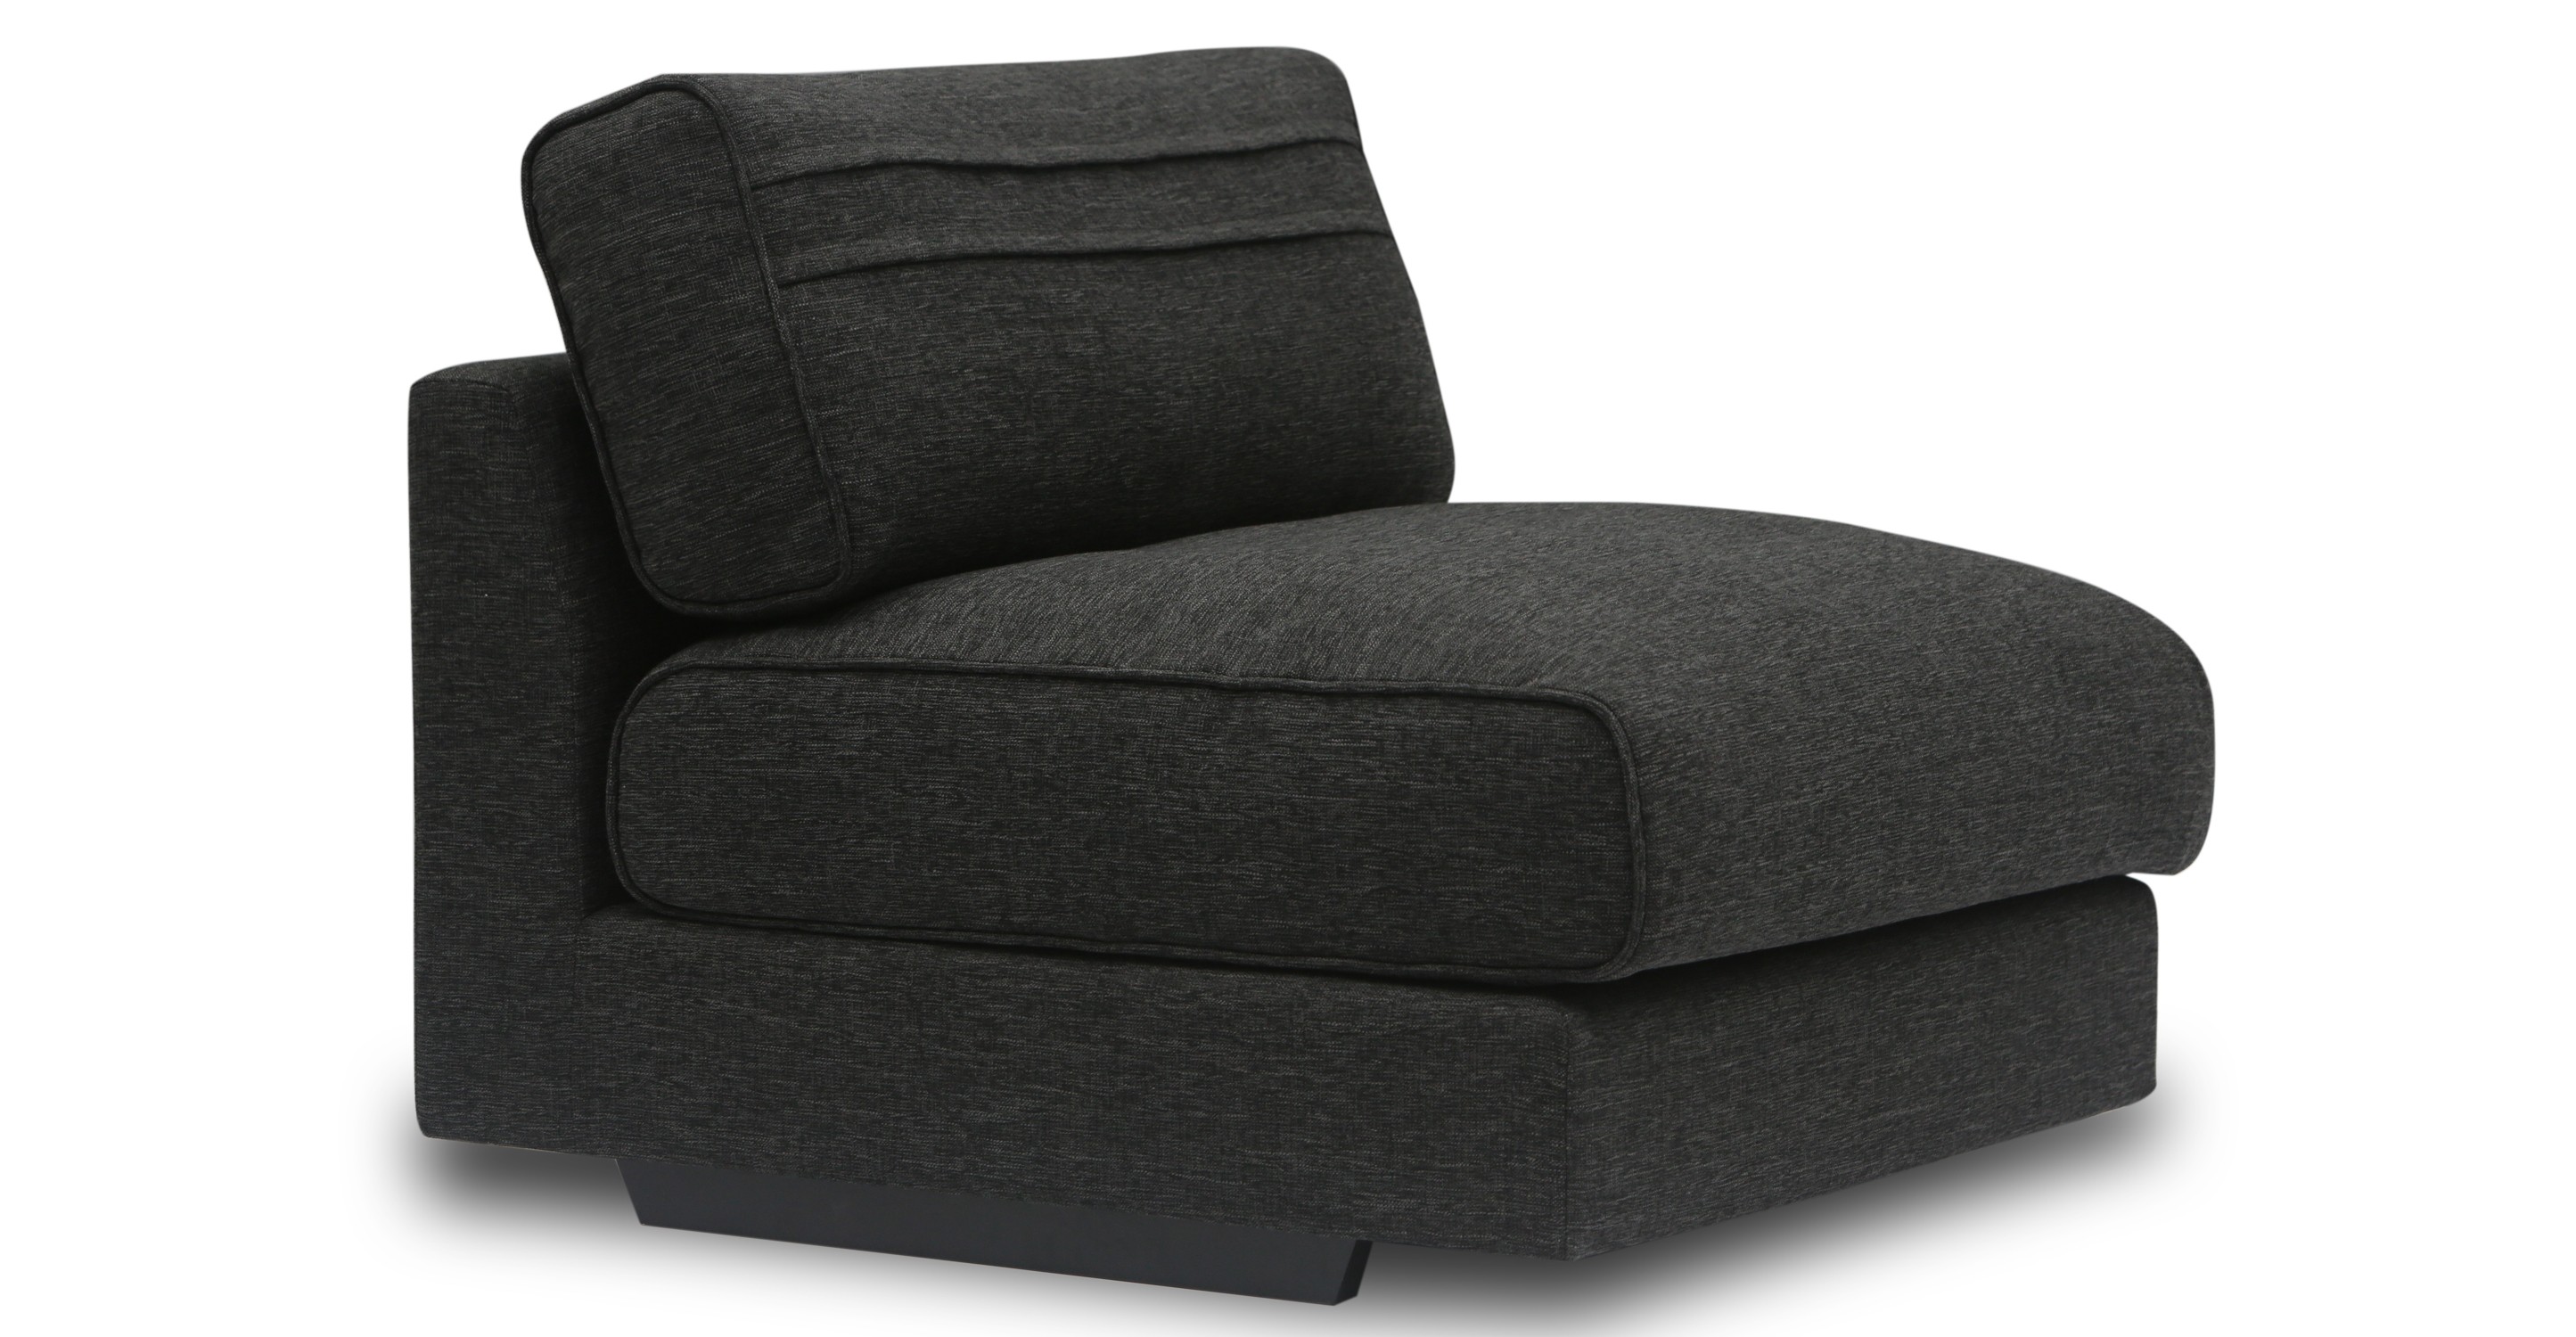 Vani Modular 4 Seat Sectional - Sectionals - Article | Modern, Mid